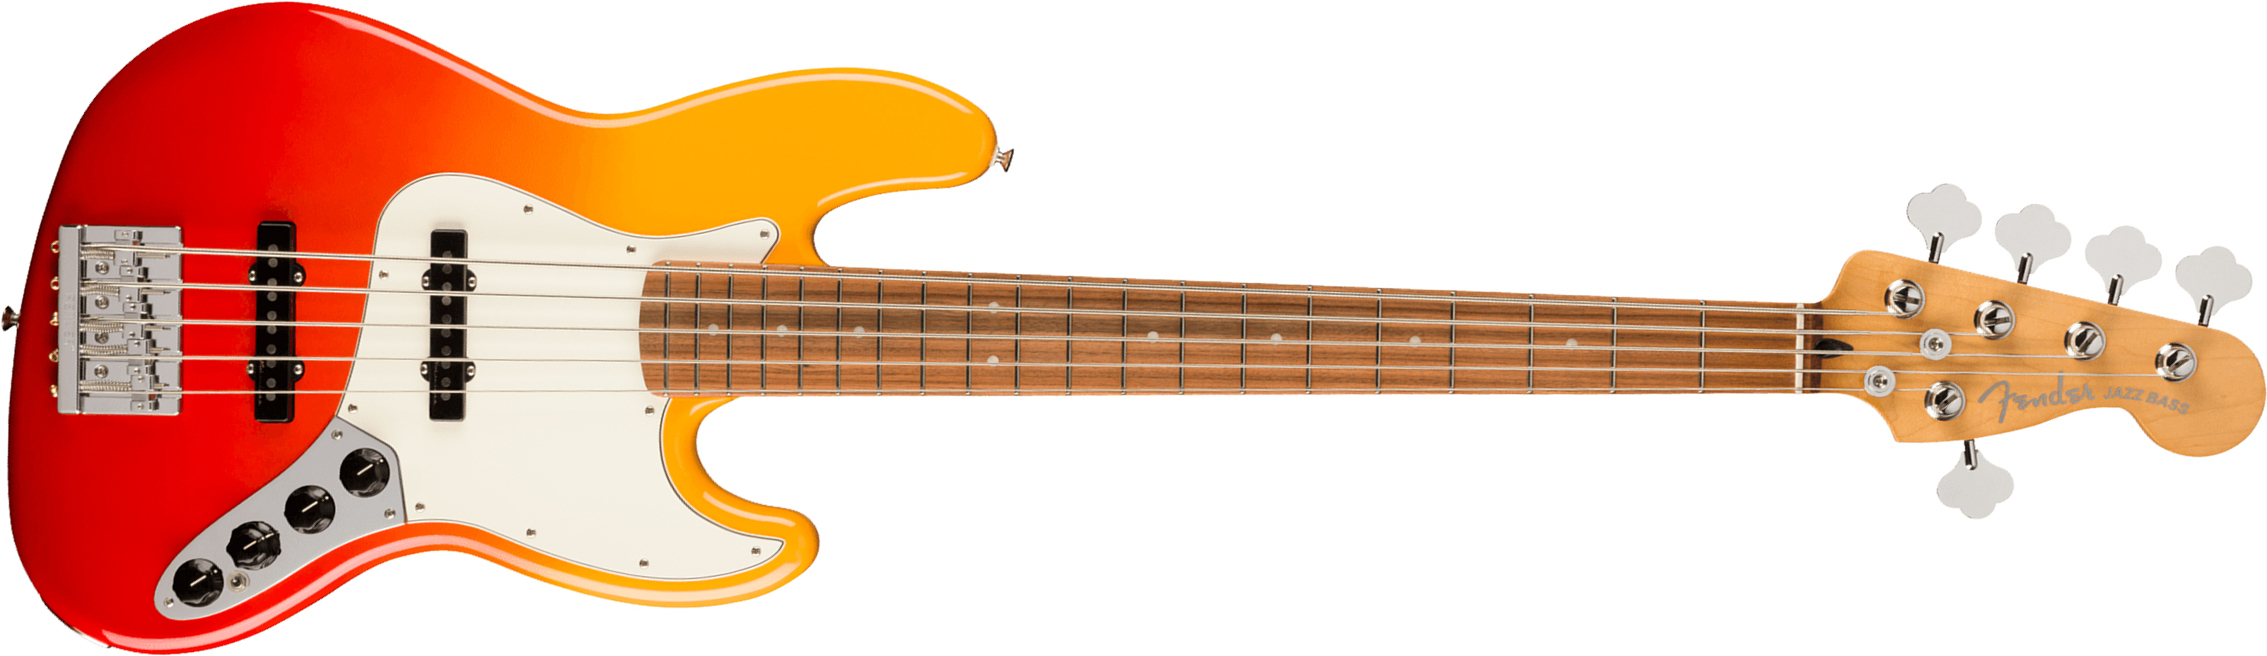 Fender Jazz Bass Player Plus V Mex 5c Active Pf - Tequila Sunrise - Solid body electric bass - Main picture